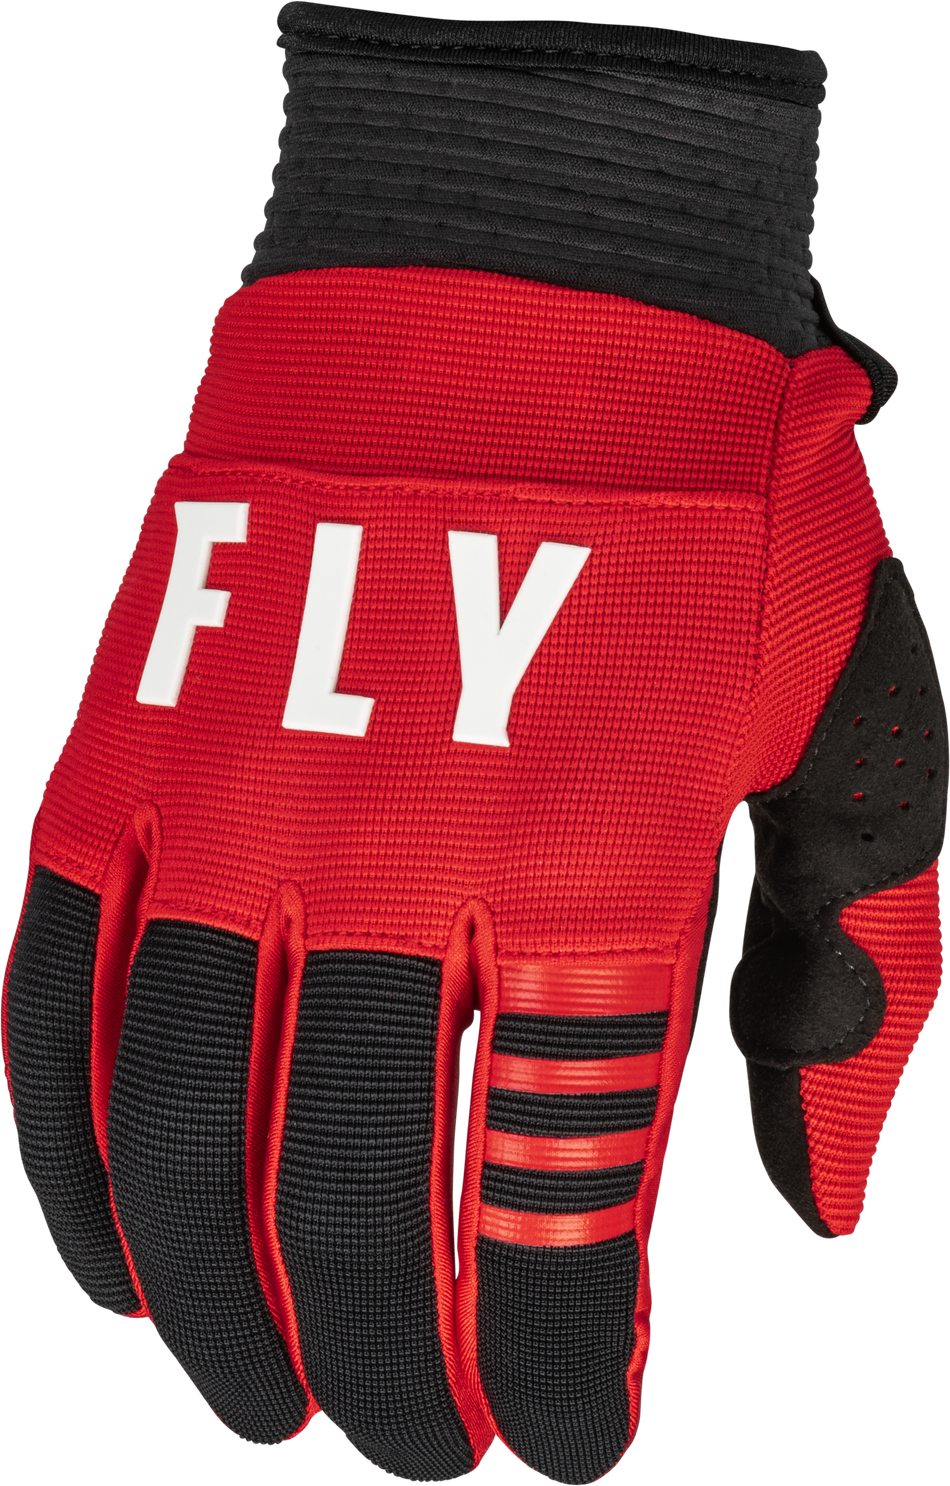 FLY RACING F-16 Gloves Red/Black 3x 376-9143X